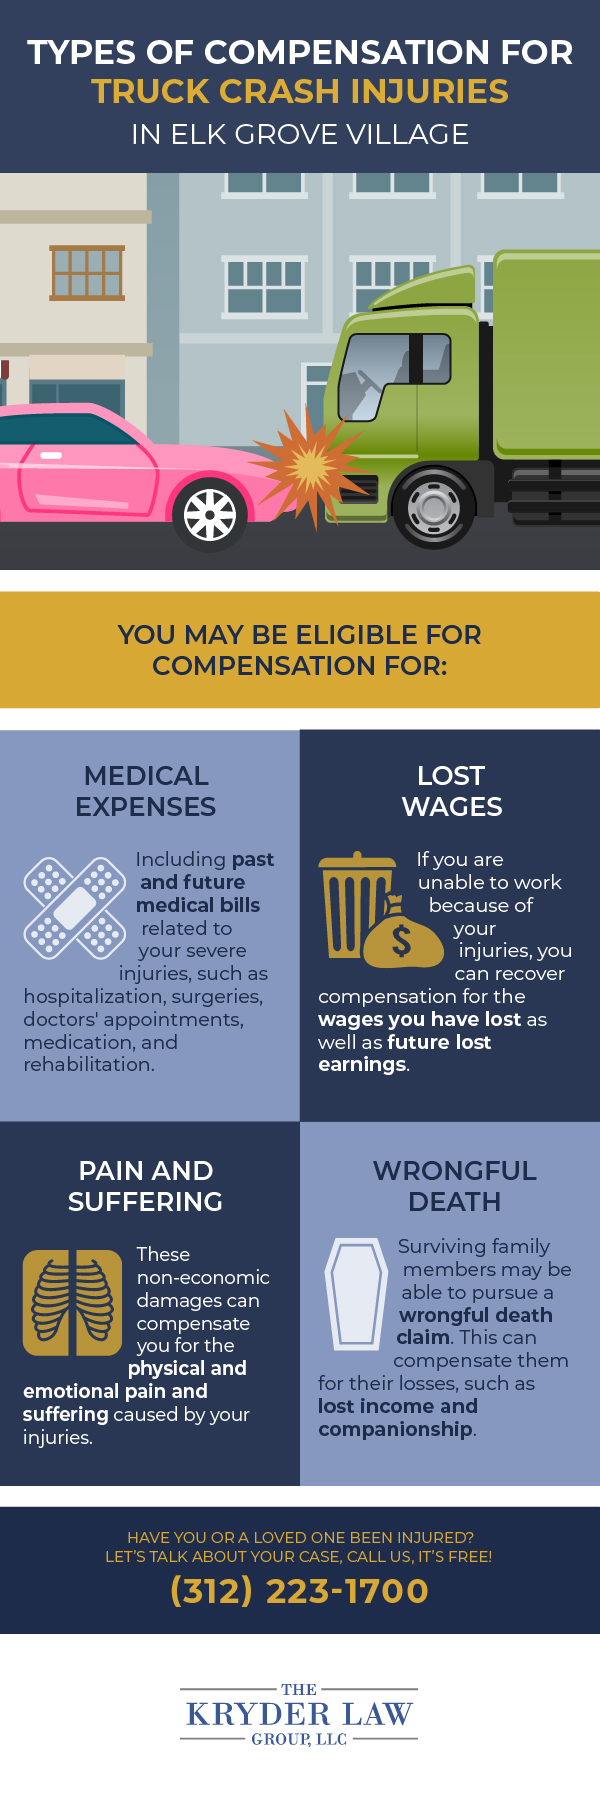 Types of Compensation for Truck Crash Injuries in Elk Grove Village Infographic